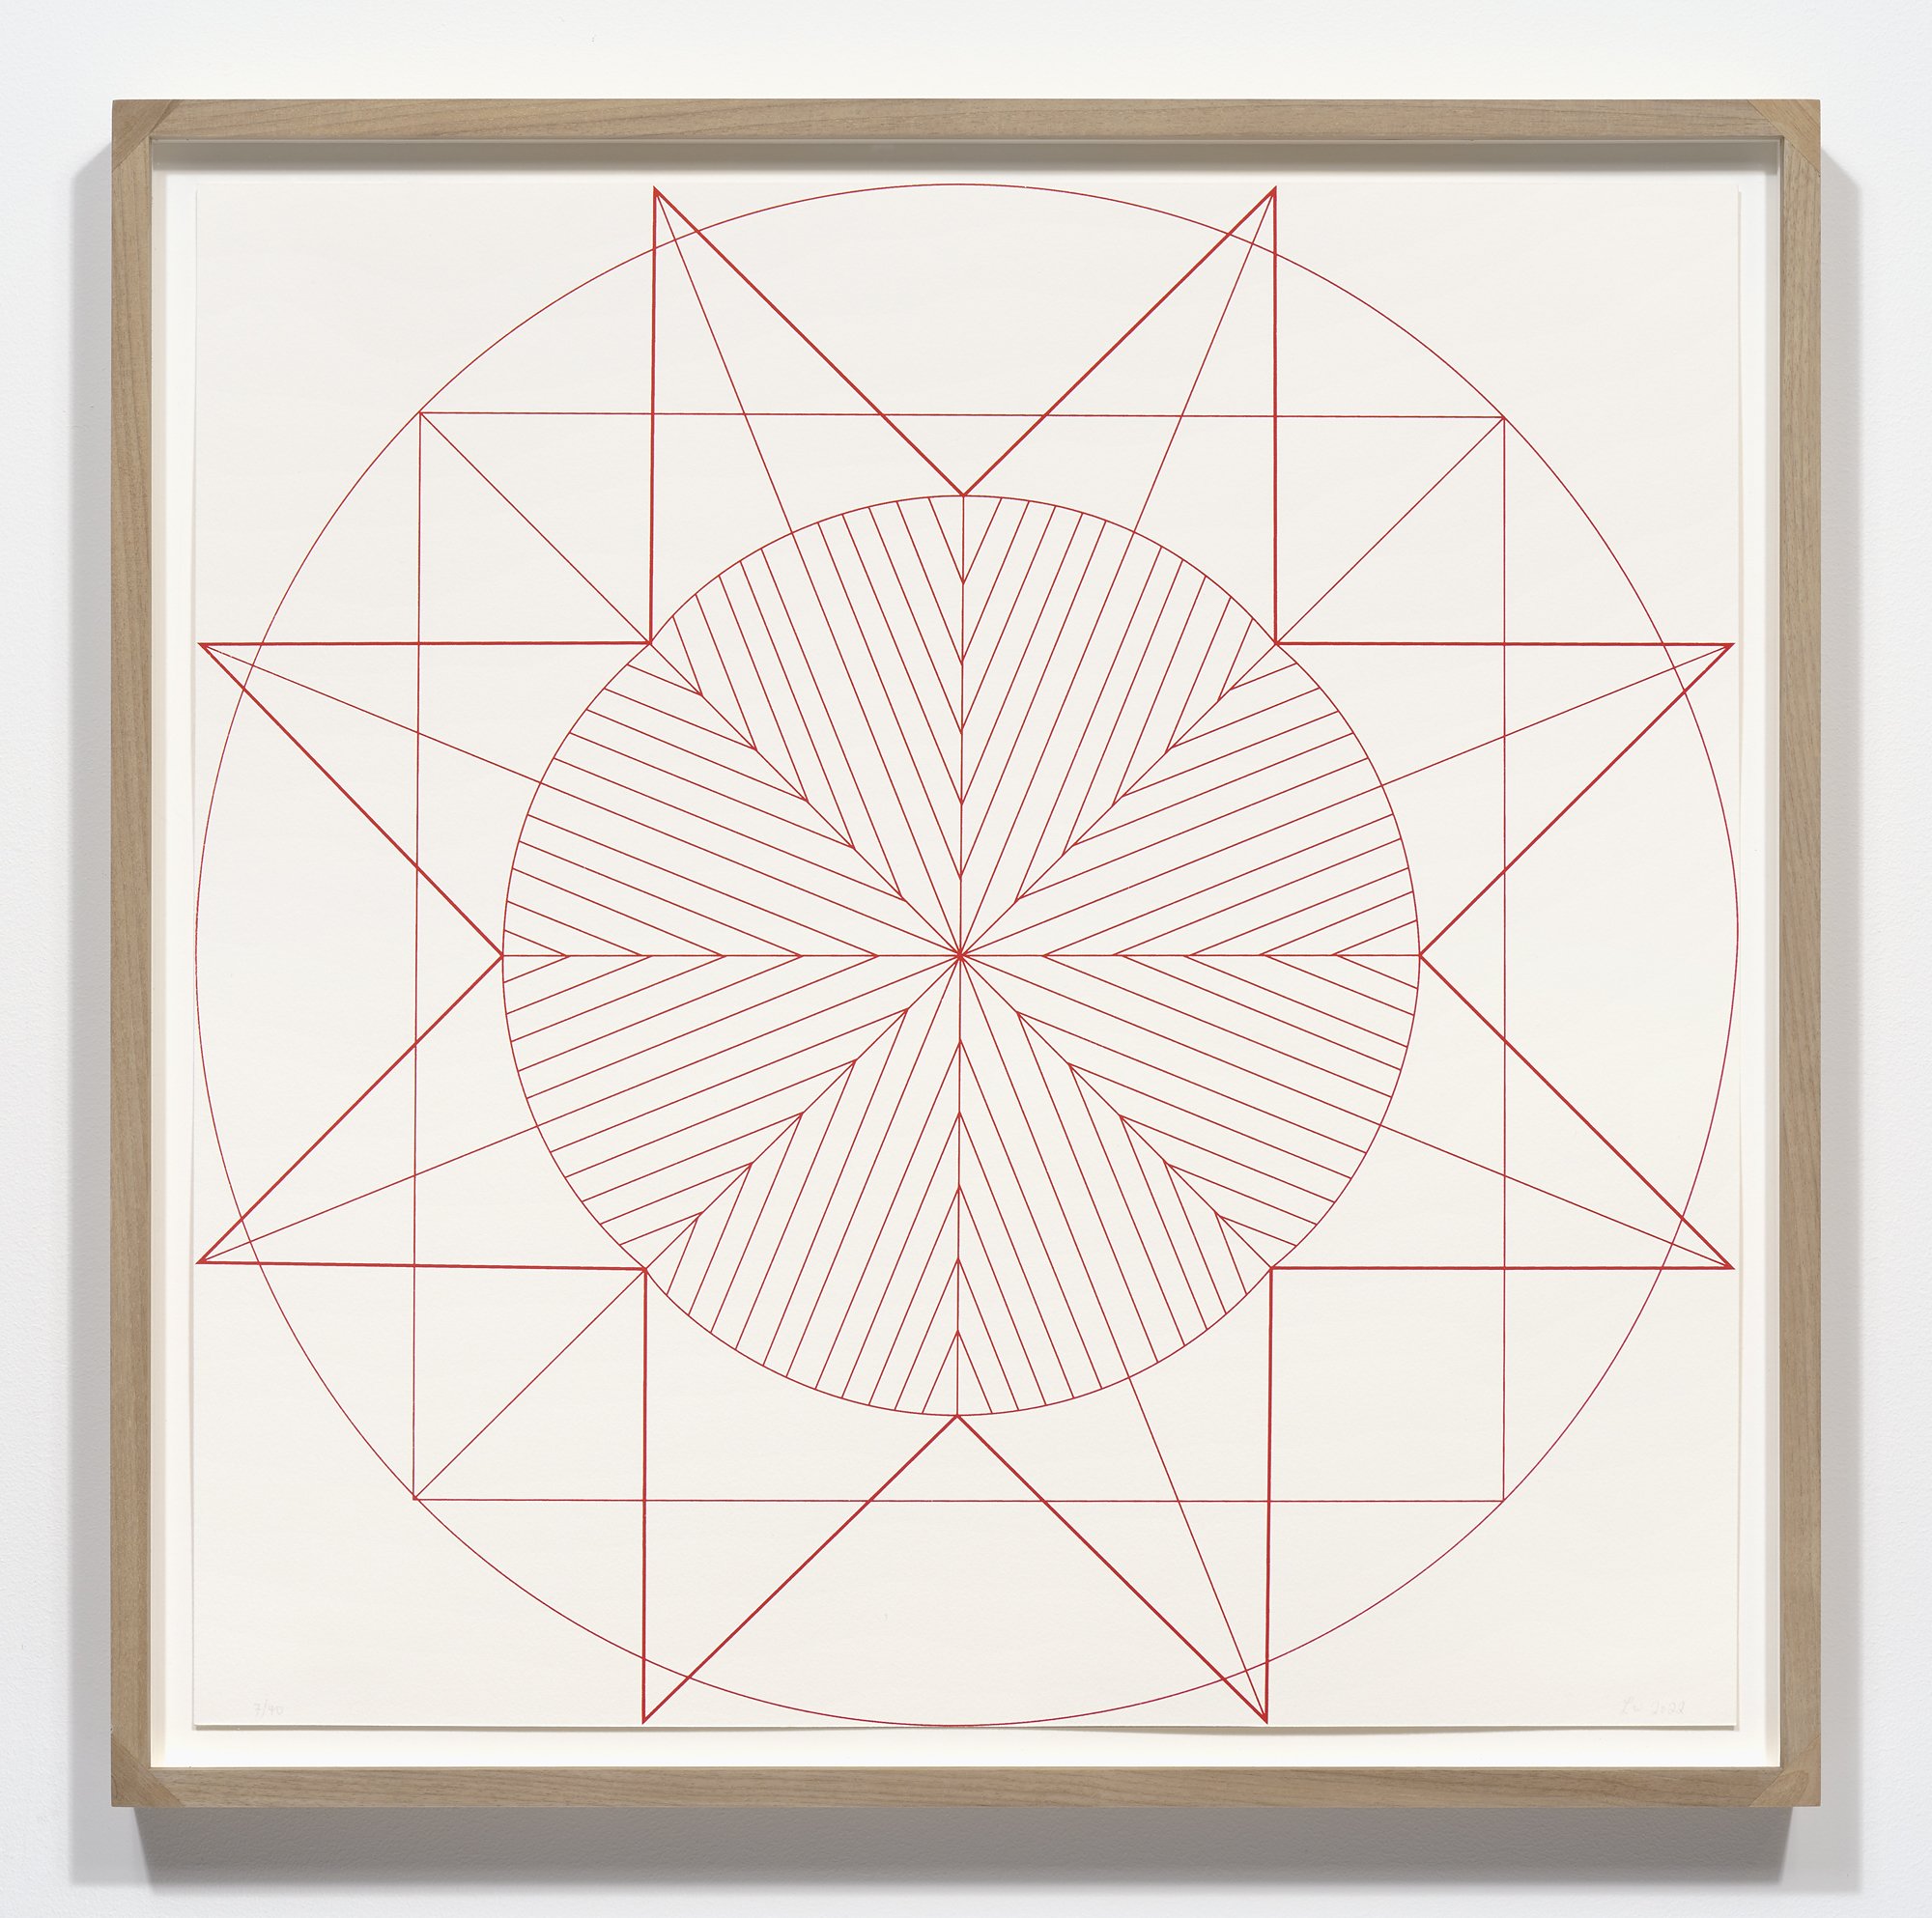  Lena Wolff,  Radiant Star #1 , 2022 Screenprint | Paper: 20 x 20 inches; Frame: 21 x 21 inches | Edition 1 of 20 | HG16239 